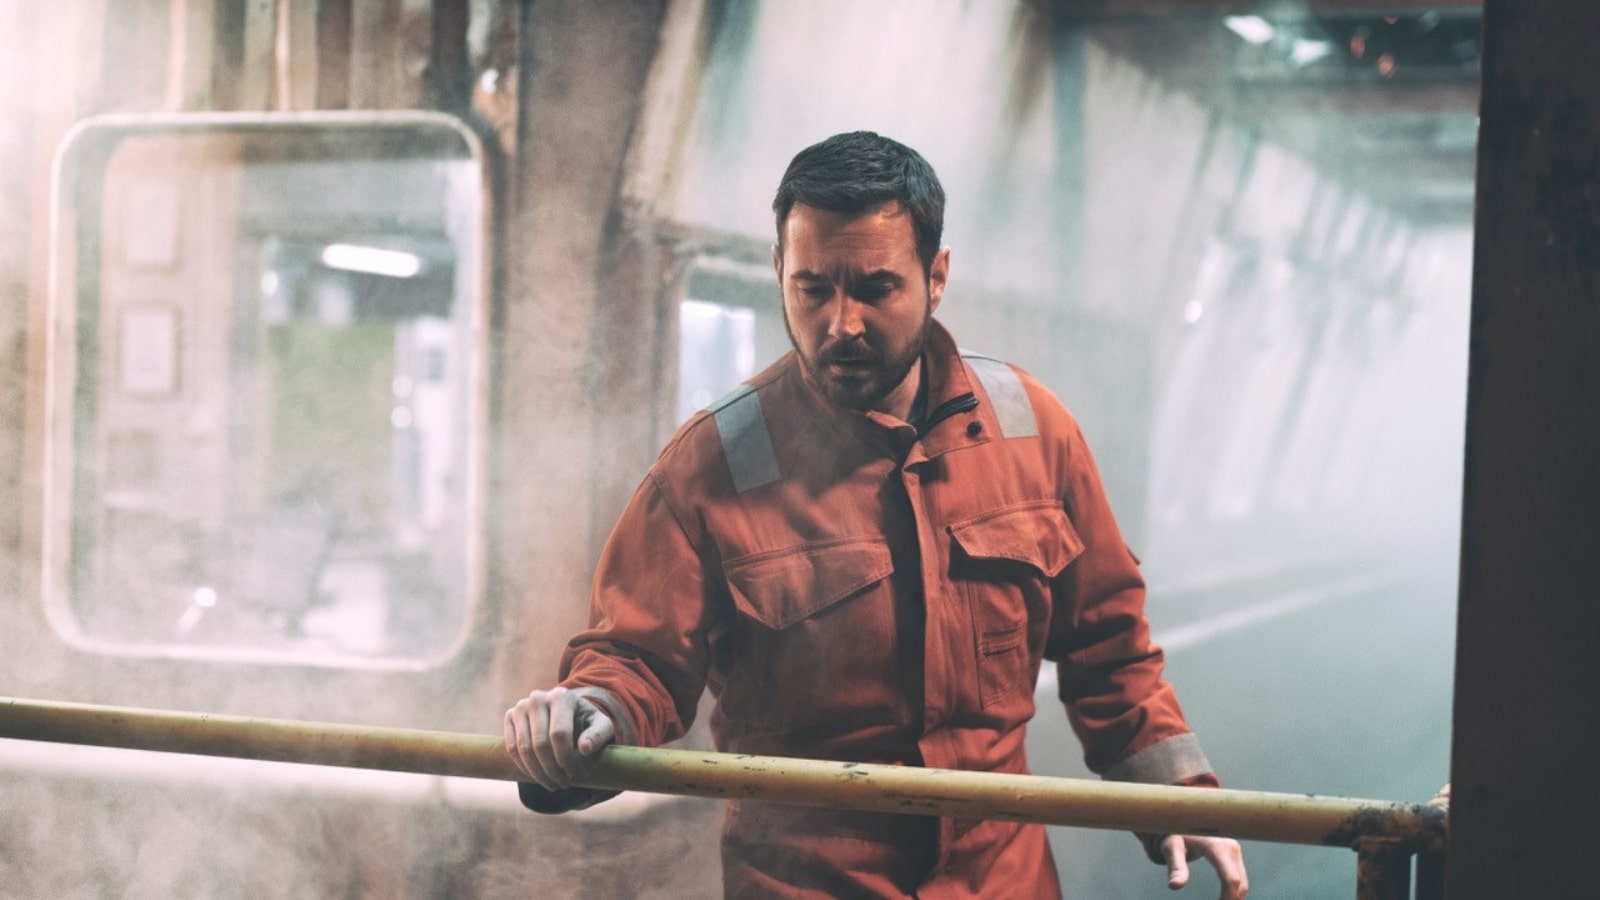 Still from the Rig. Martin Compston in organ boiler suit, smoke/fog can be seen behind him